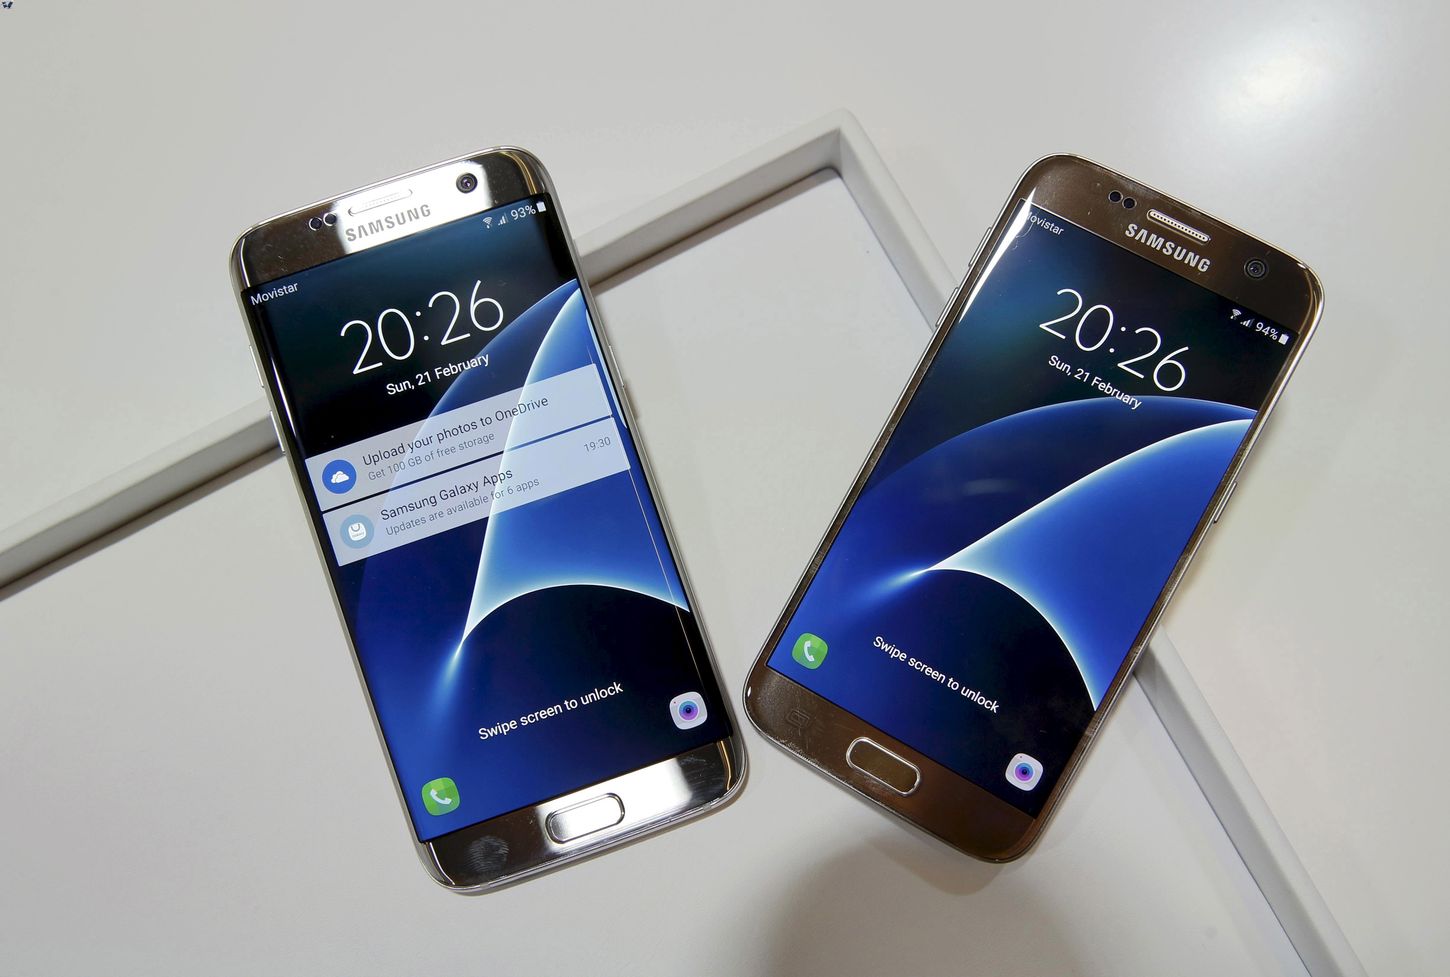 galaxy-s7-s7-edge-performance-issues-with-exynos-8890